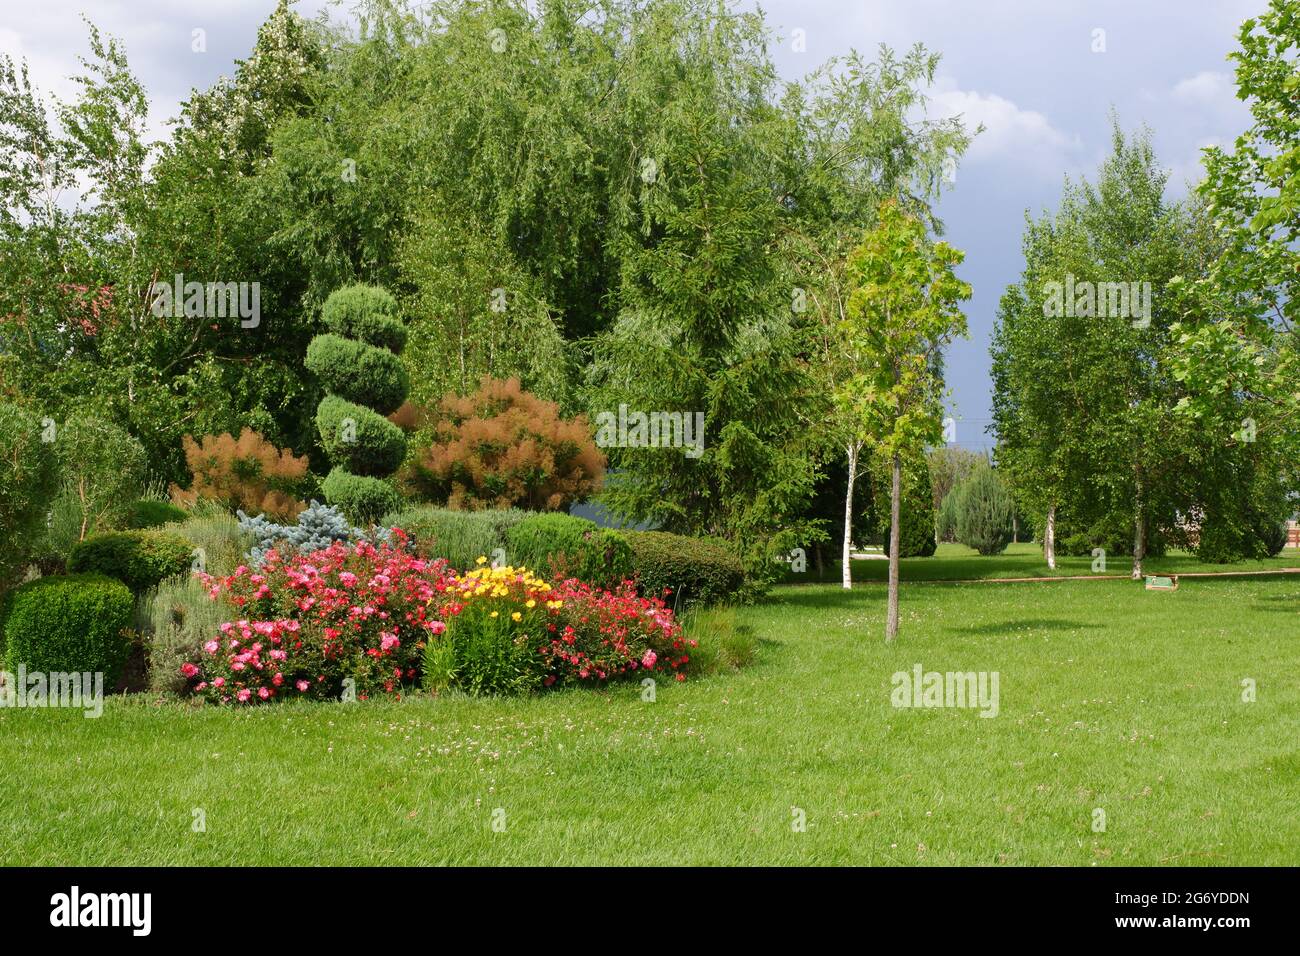 Colorful Bushes and Flowers on Grass Stock Photo